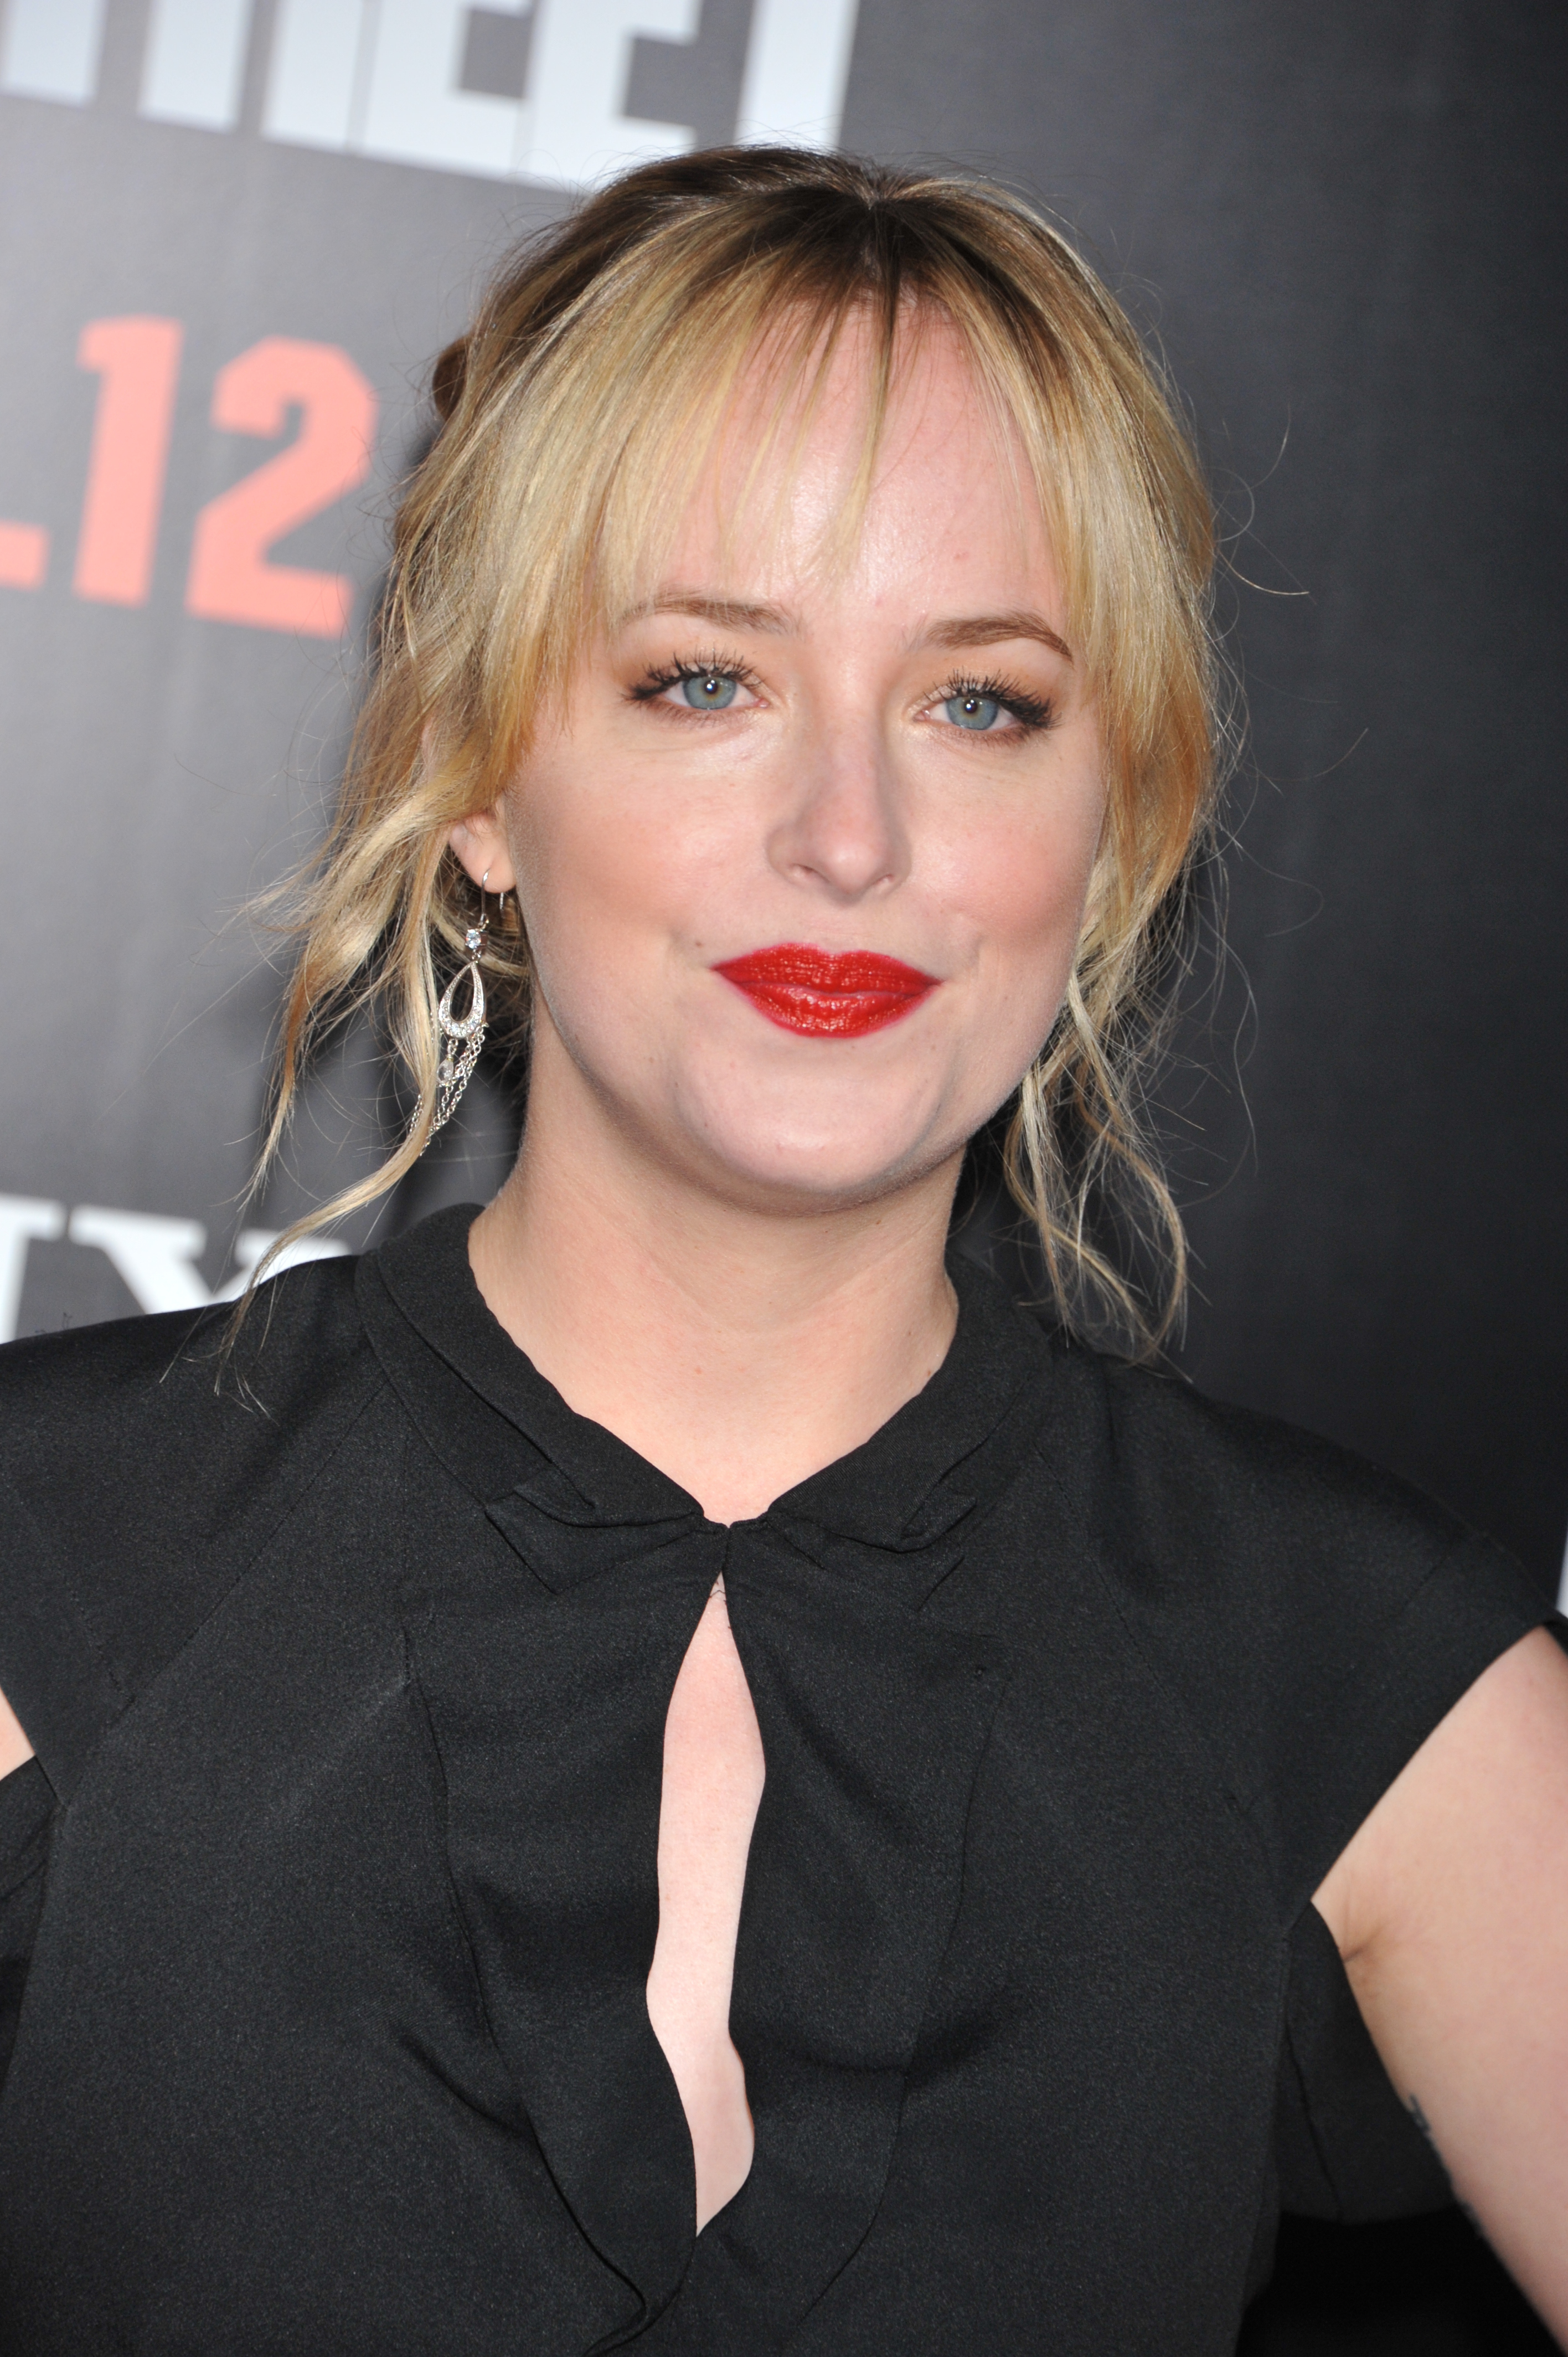 Dakota Johnson attends the "21 Jump Street" premiere on March 13, 2012 in Hollywood, California | Source: Getty Images